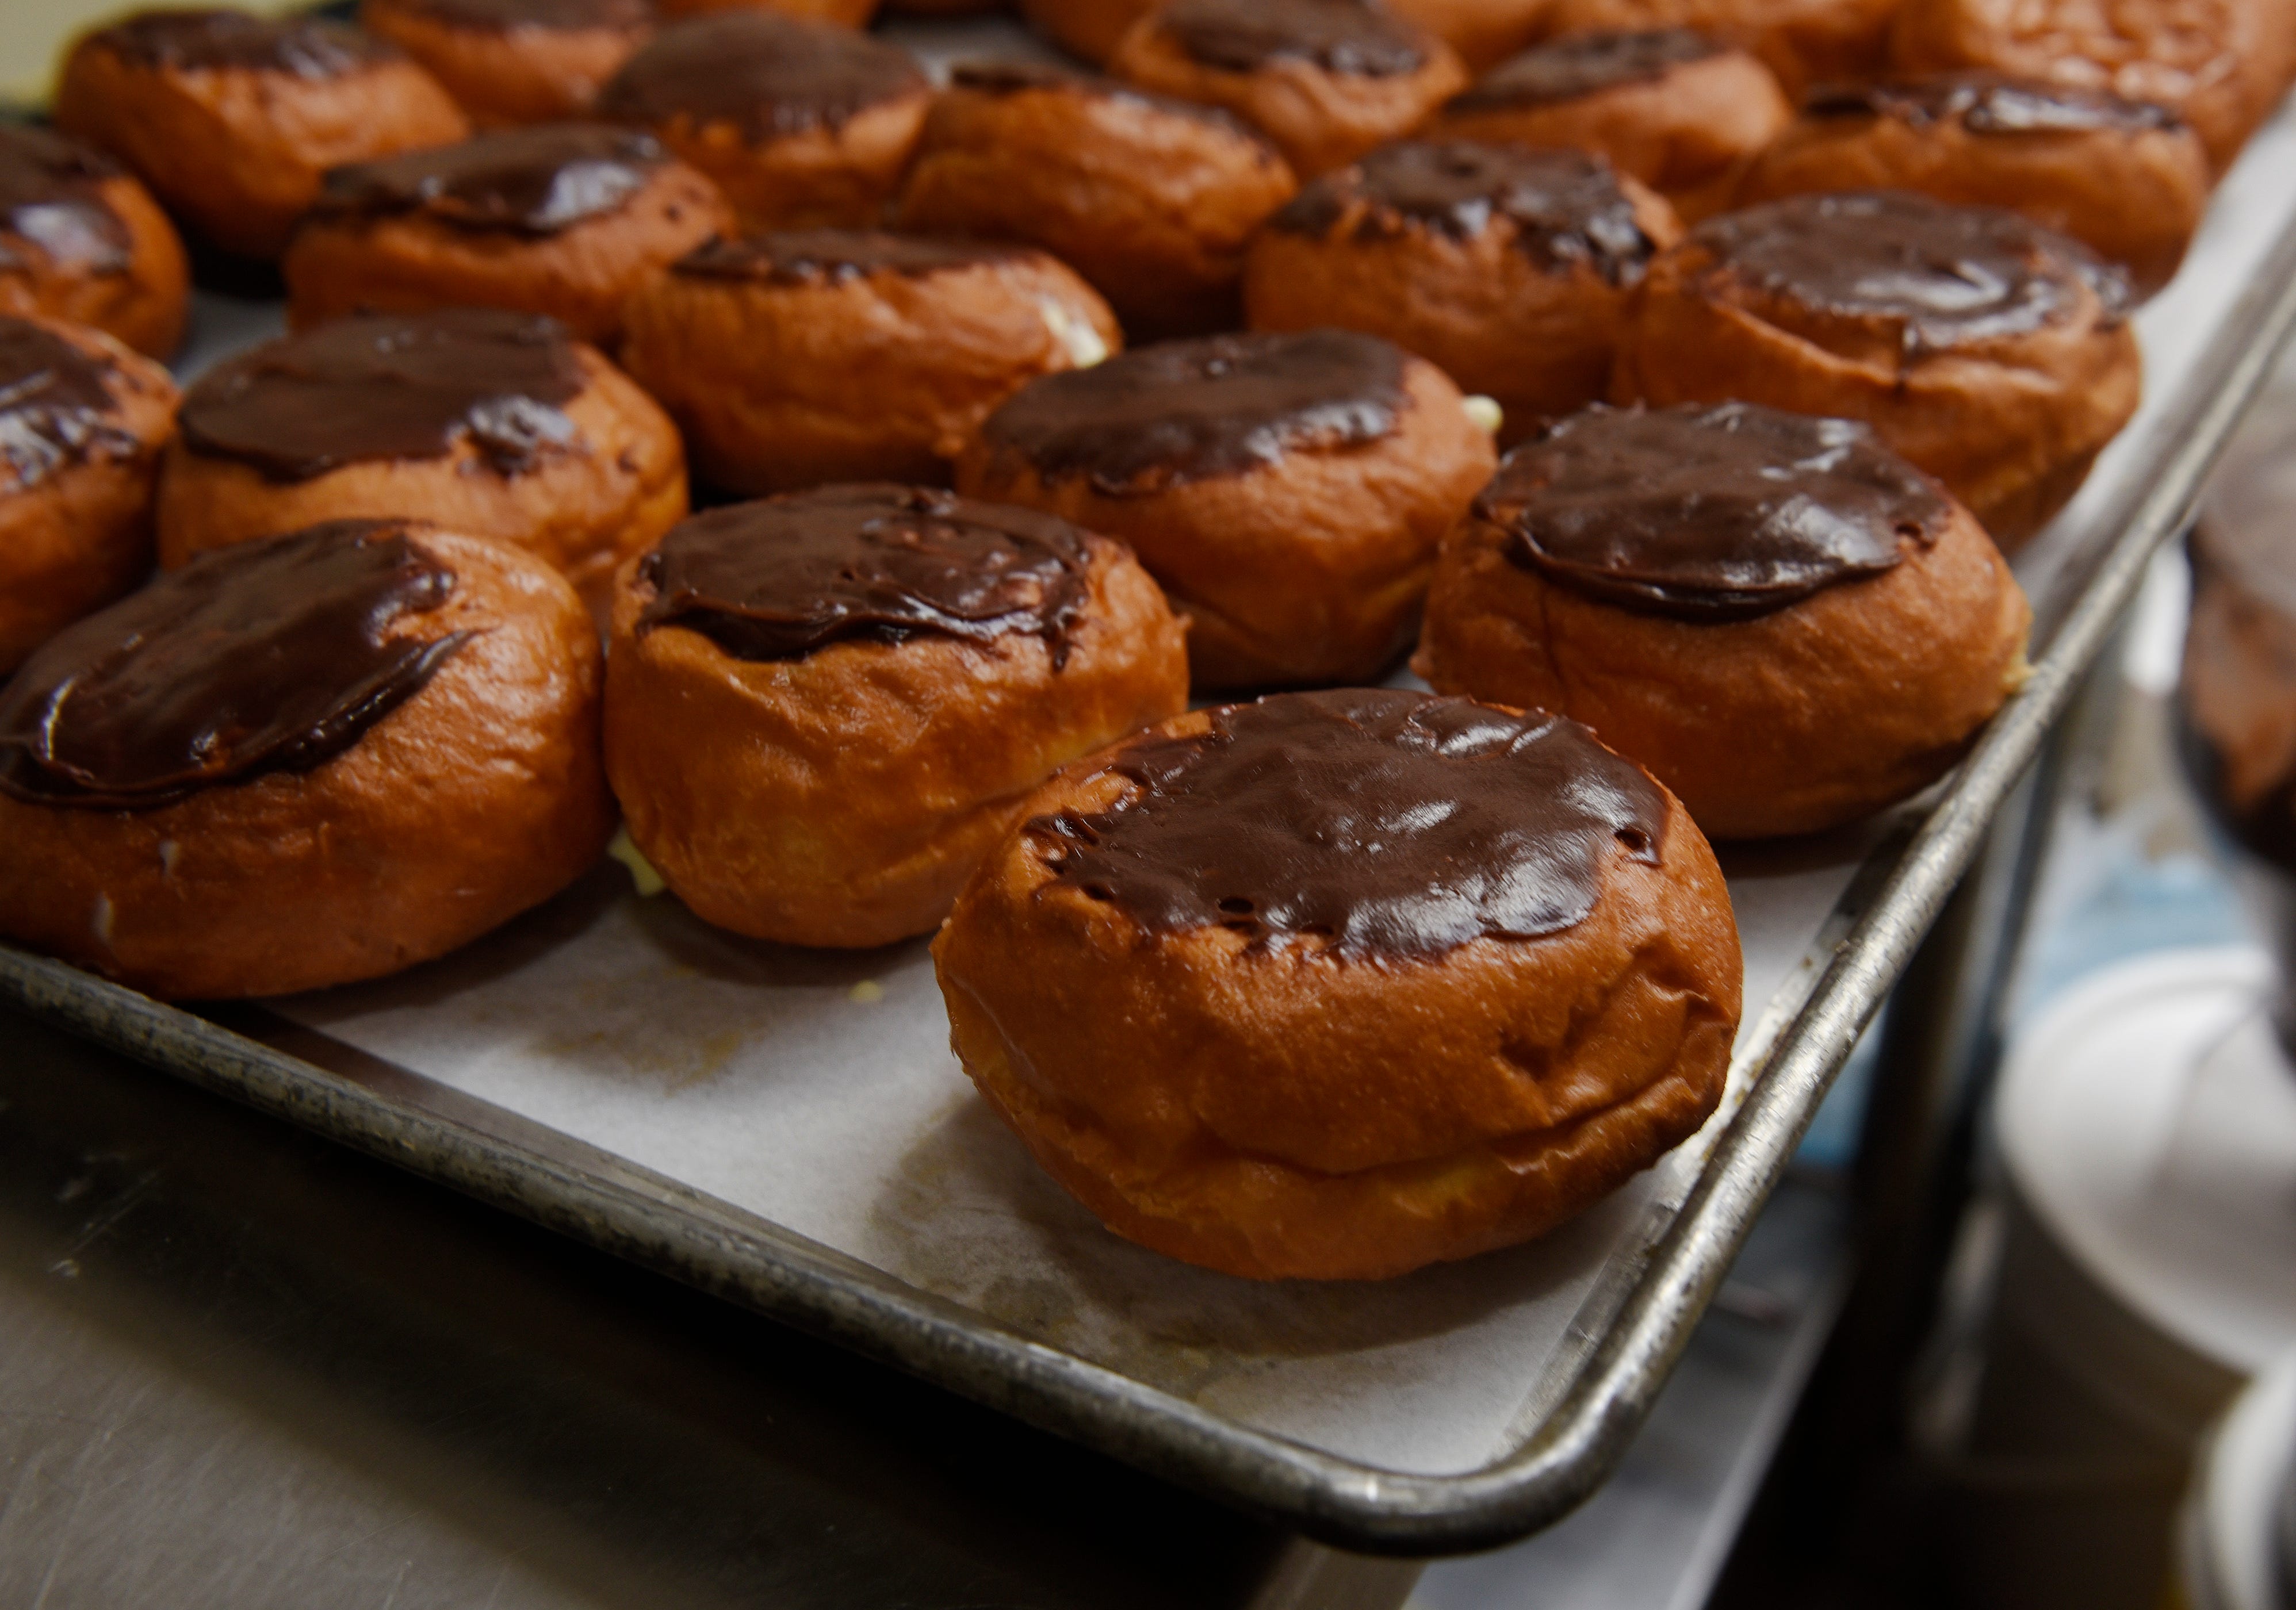 A tray of Boston Cream with chocolate fudge paczki are ready for purchase.